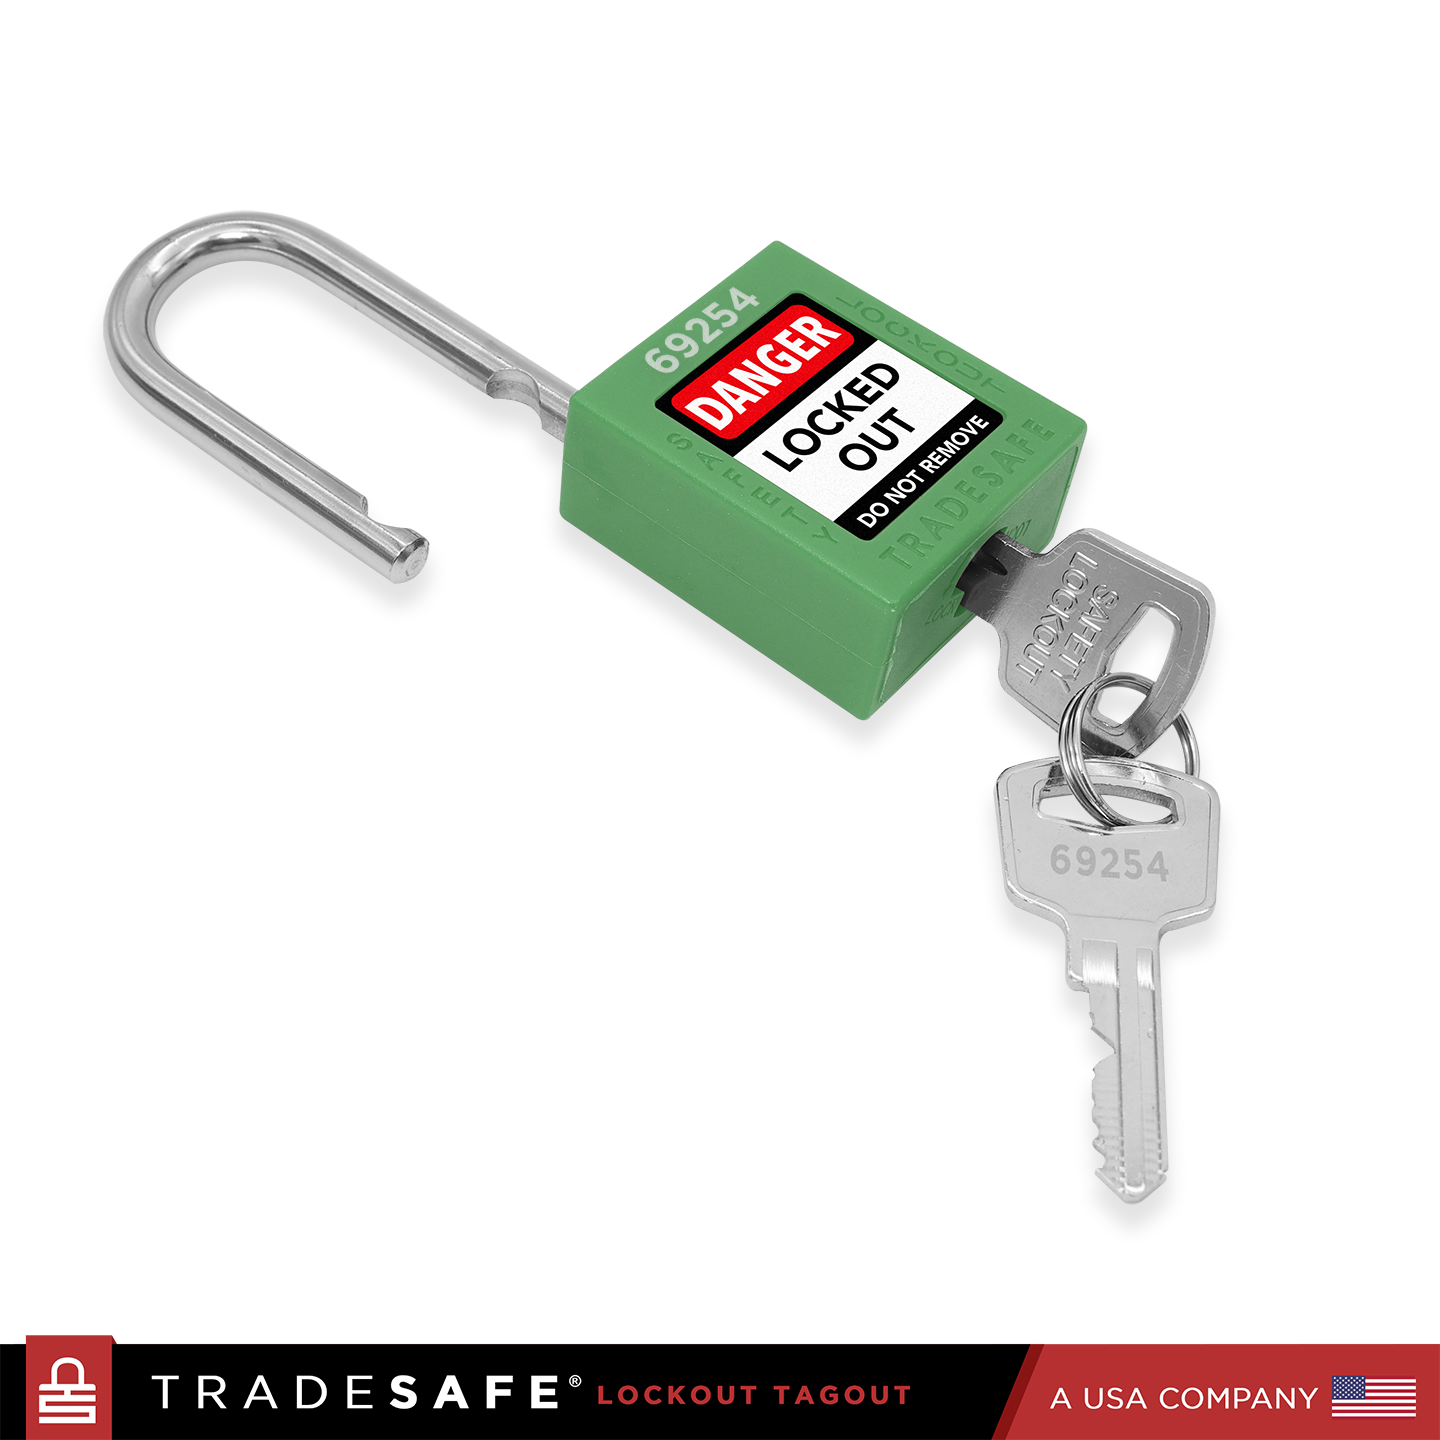 a green loto padlock with 2 keys, 1 key inserted